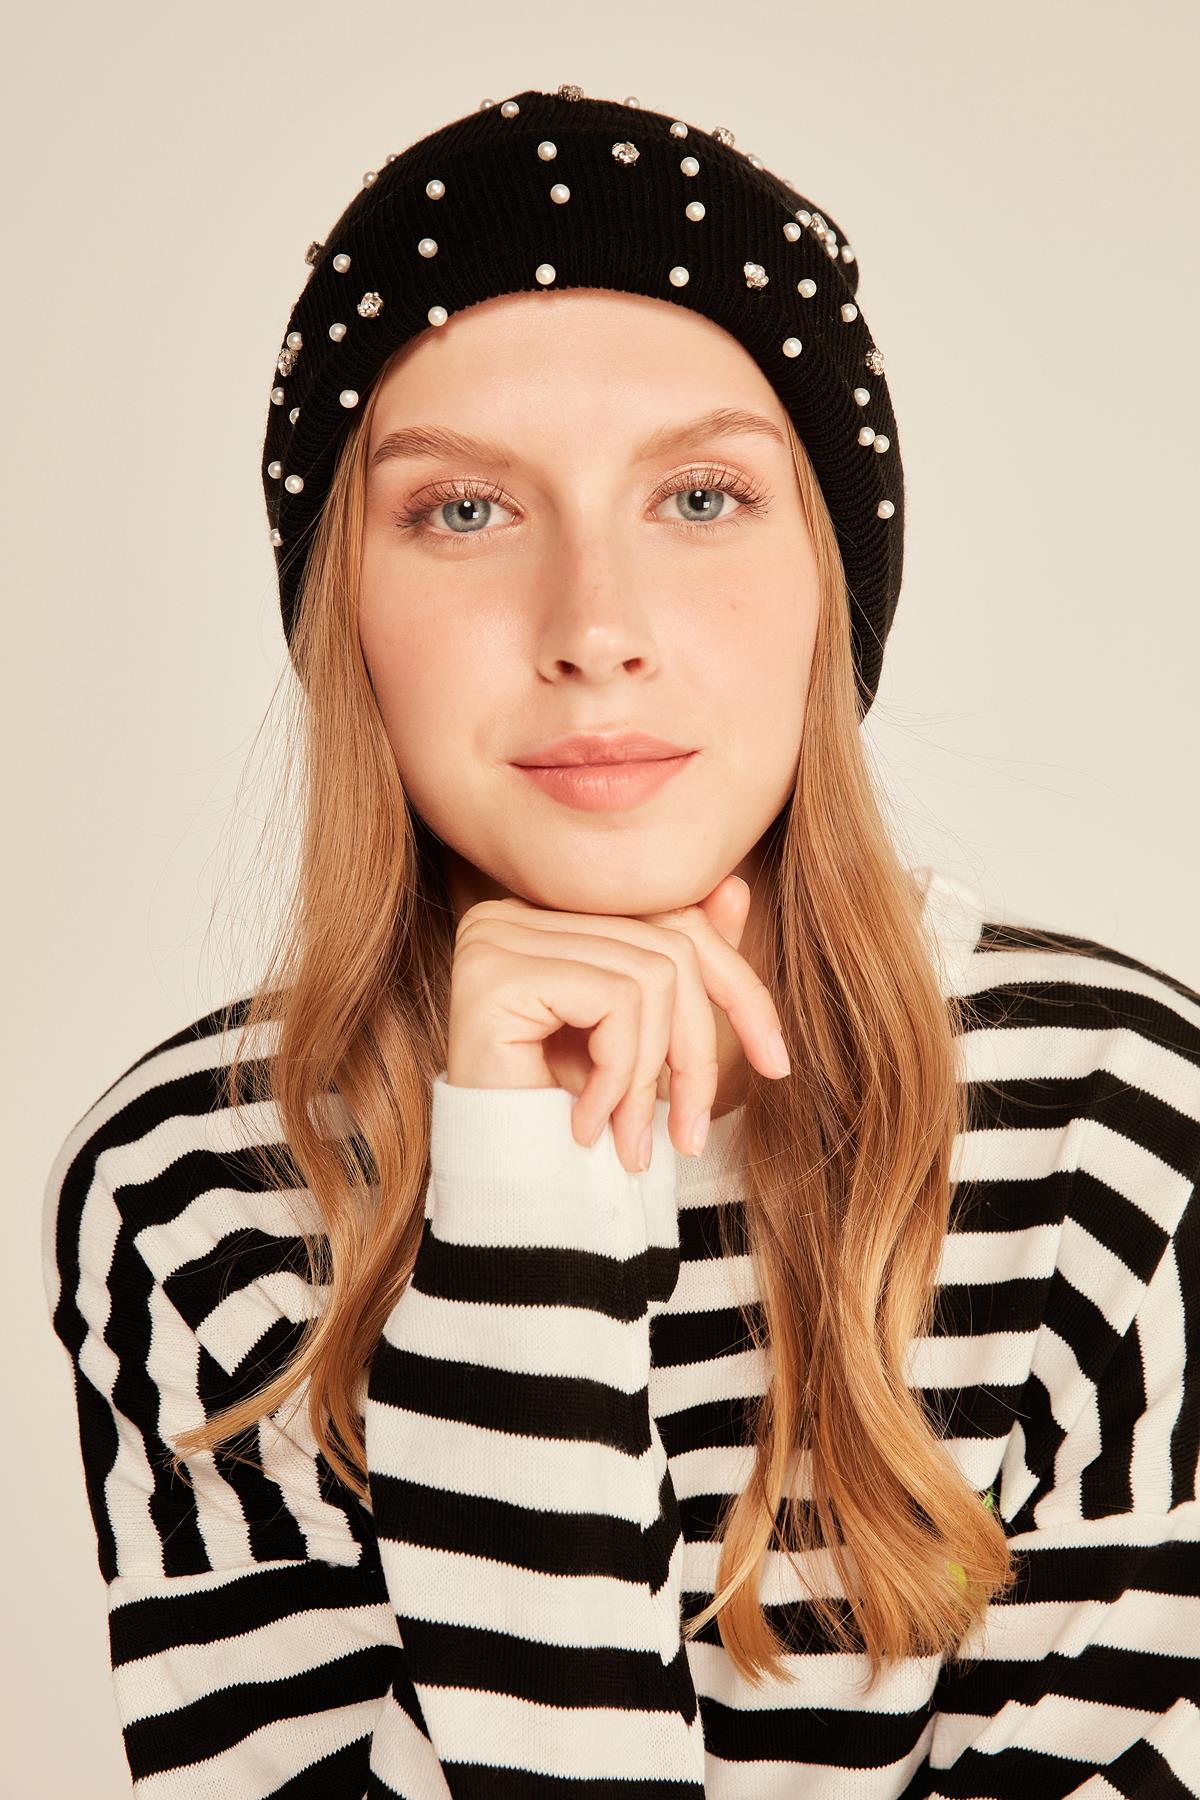 A model wears NSV11138 - Beret With Pearls - Black, wholesale Beret of Nesvay to display at Lonca